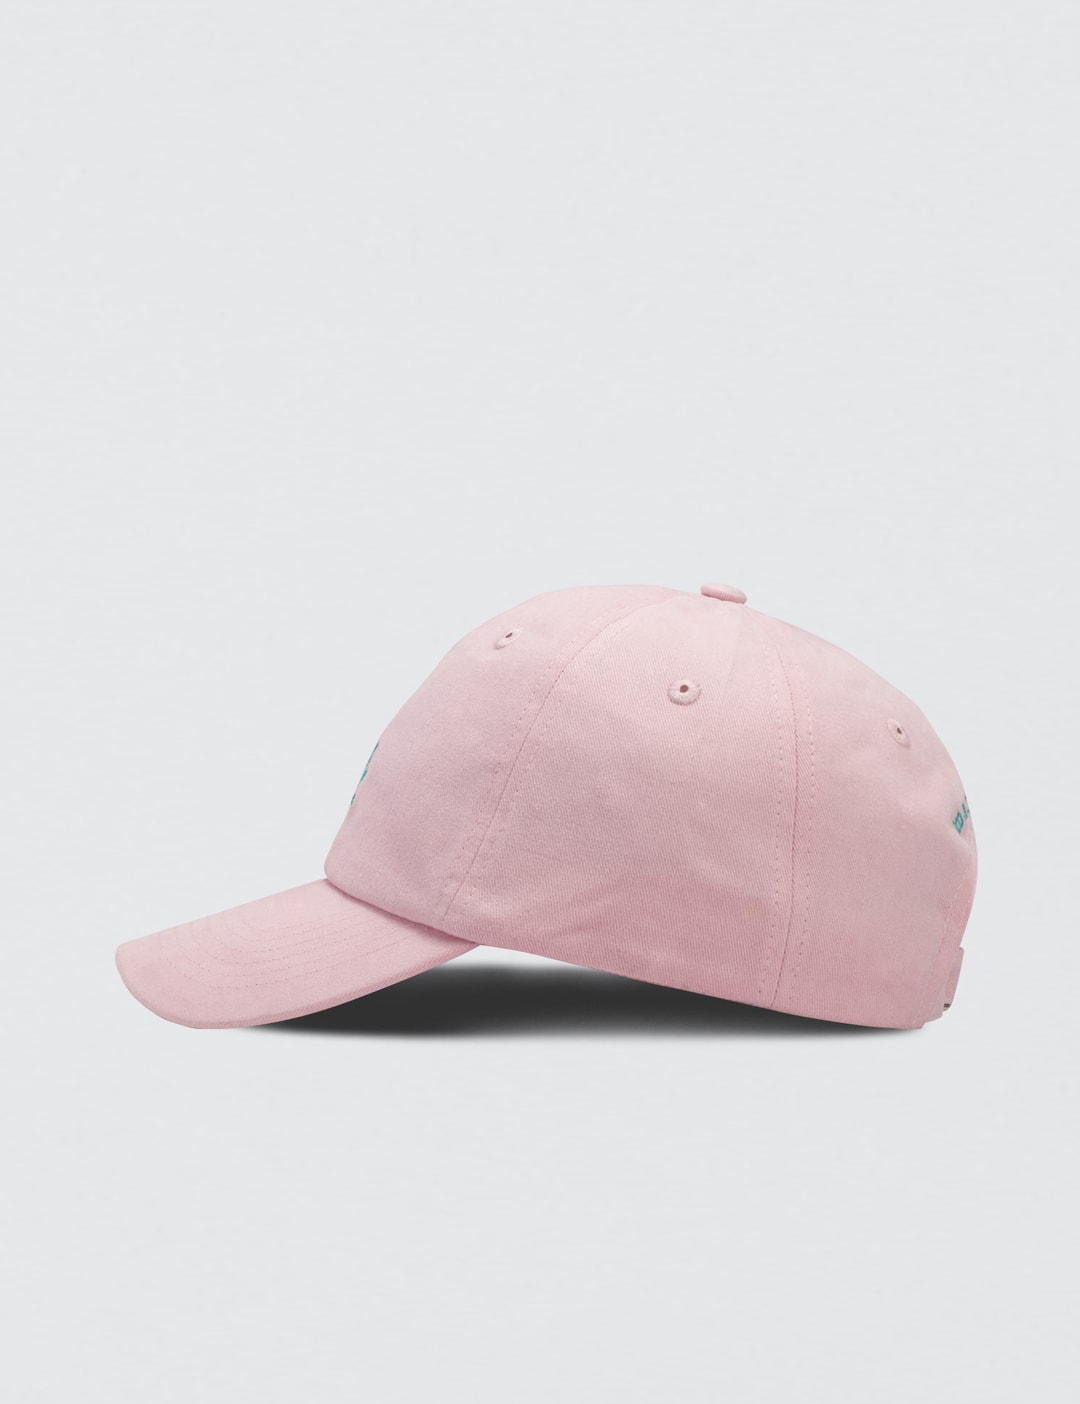 Wasted Paris - 6 Panel Cap | HBX - Globally Curated Fashion and ...